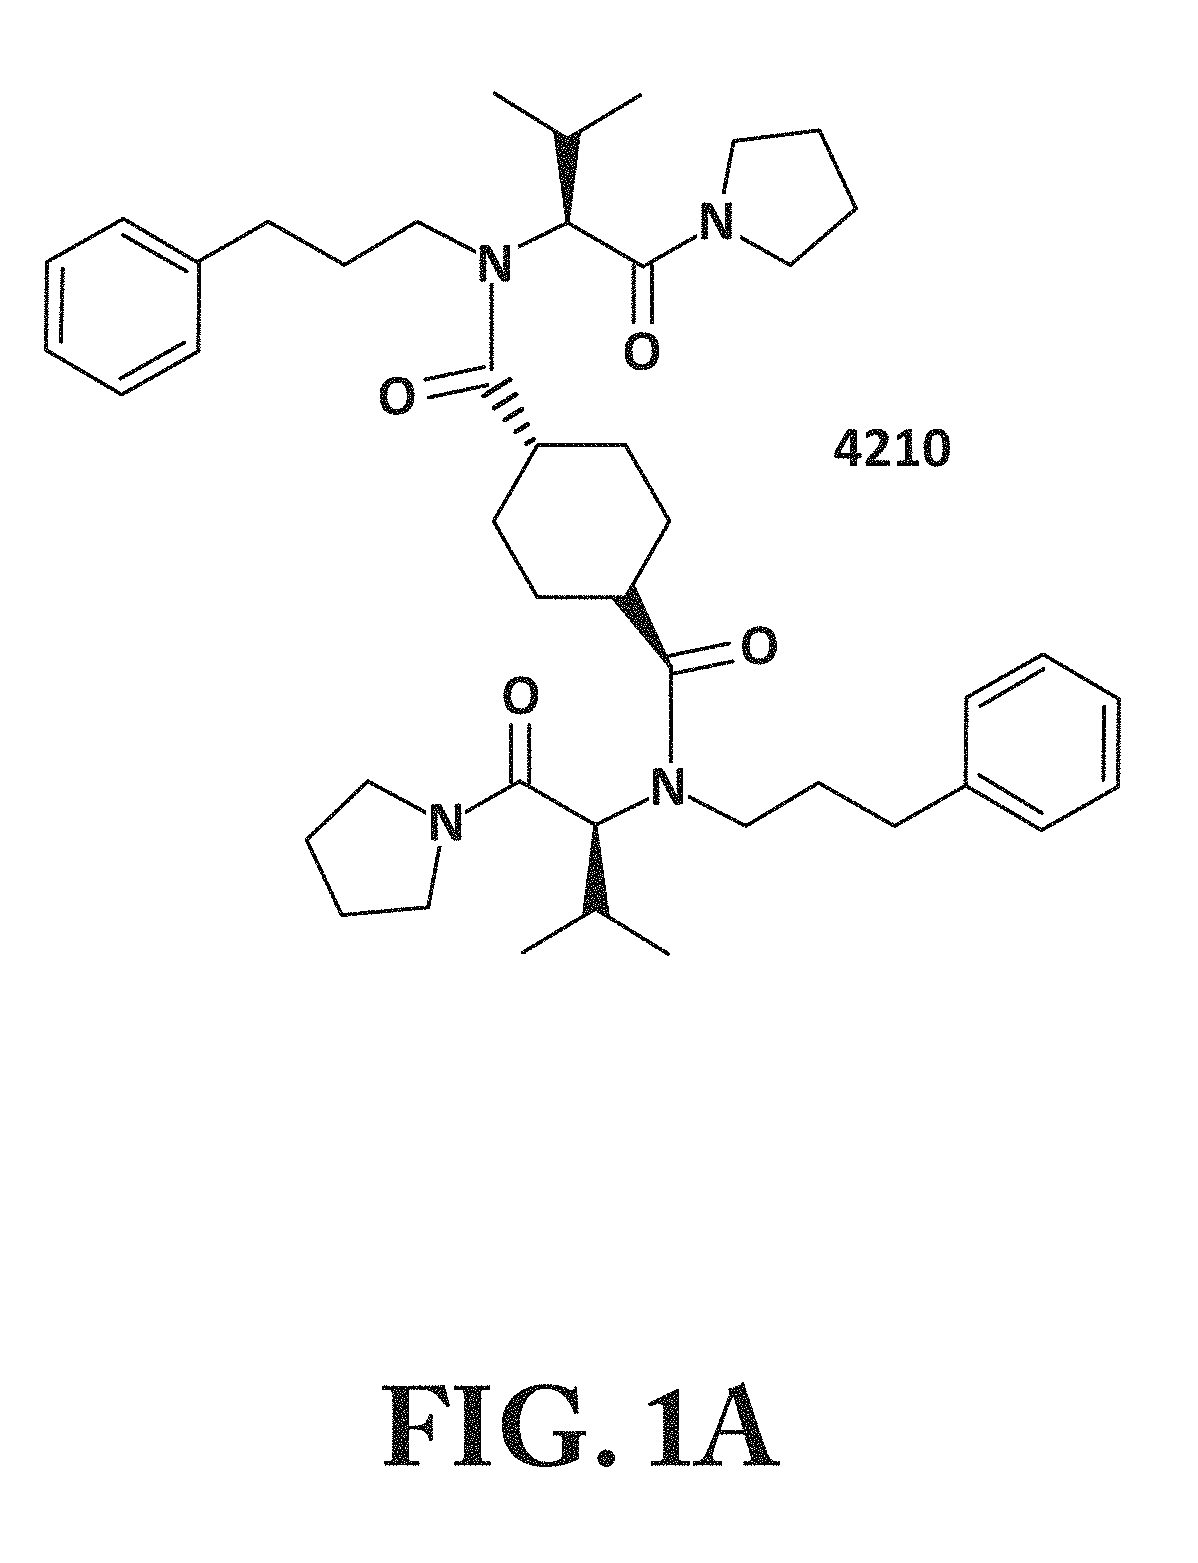 Small molecule inhibitor of MYD88 for therapeutic treatment against alphavirus and staphylococcal enterotoxin infections and toxin exposure